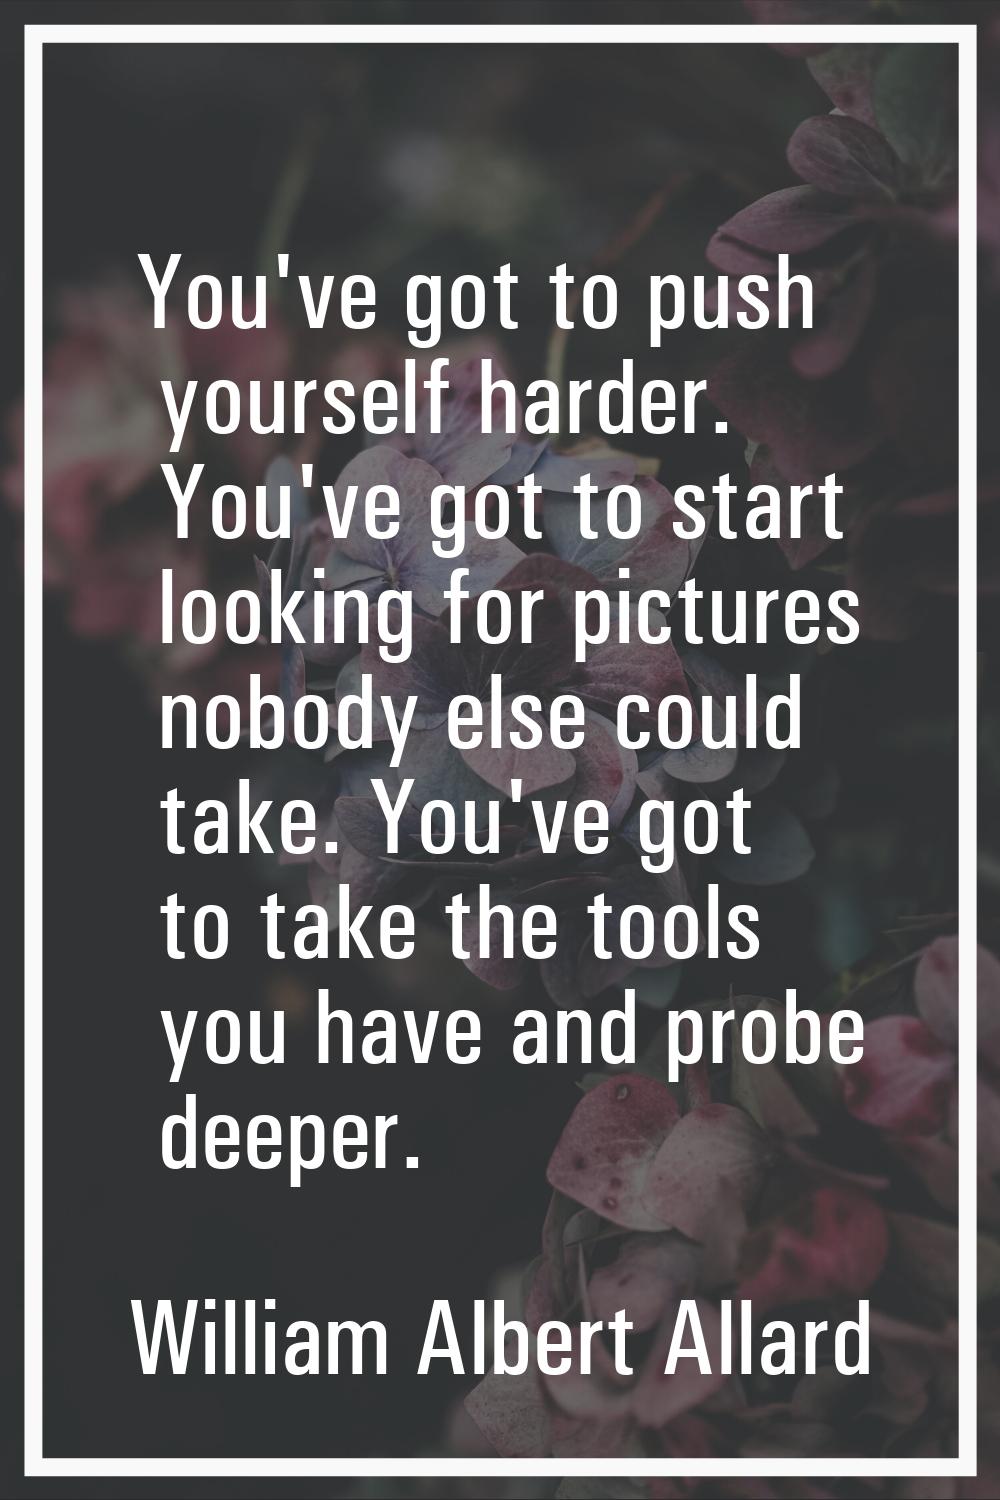 You've got to push yourself harder. You've got to start looking for pictures nobody else could take